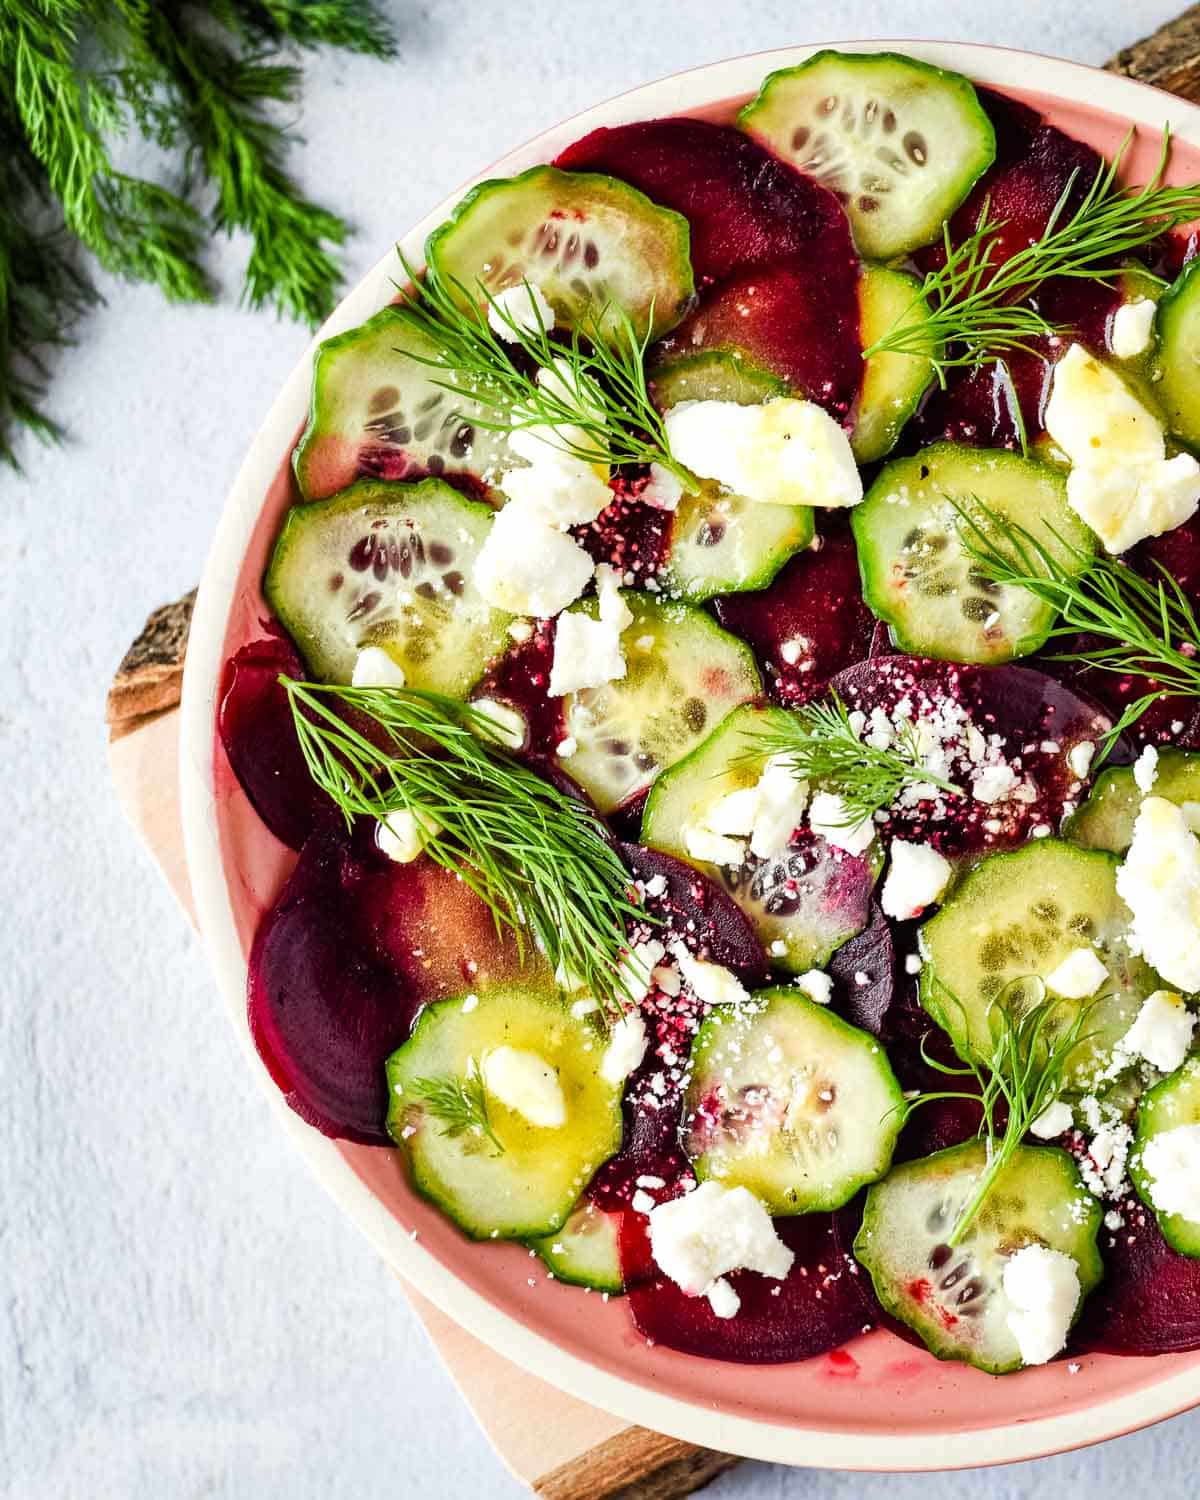 beet cucumber salad is shown on a pink plate with a wood cutting board and dill.